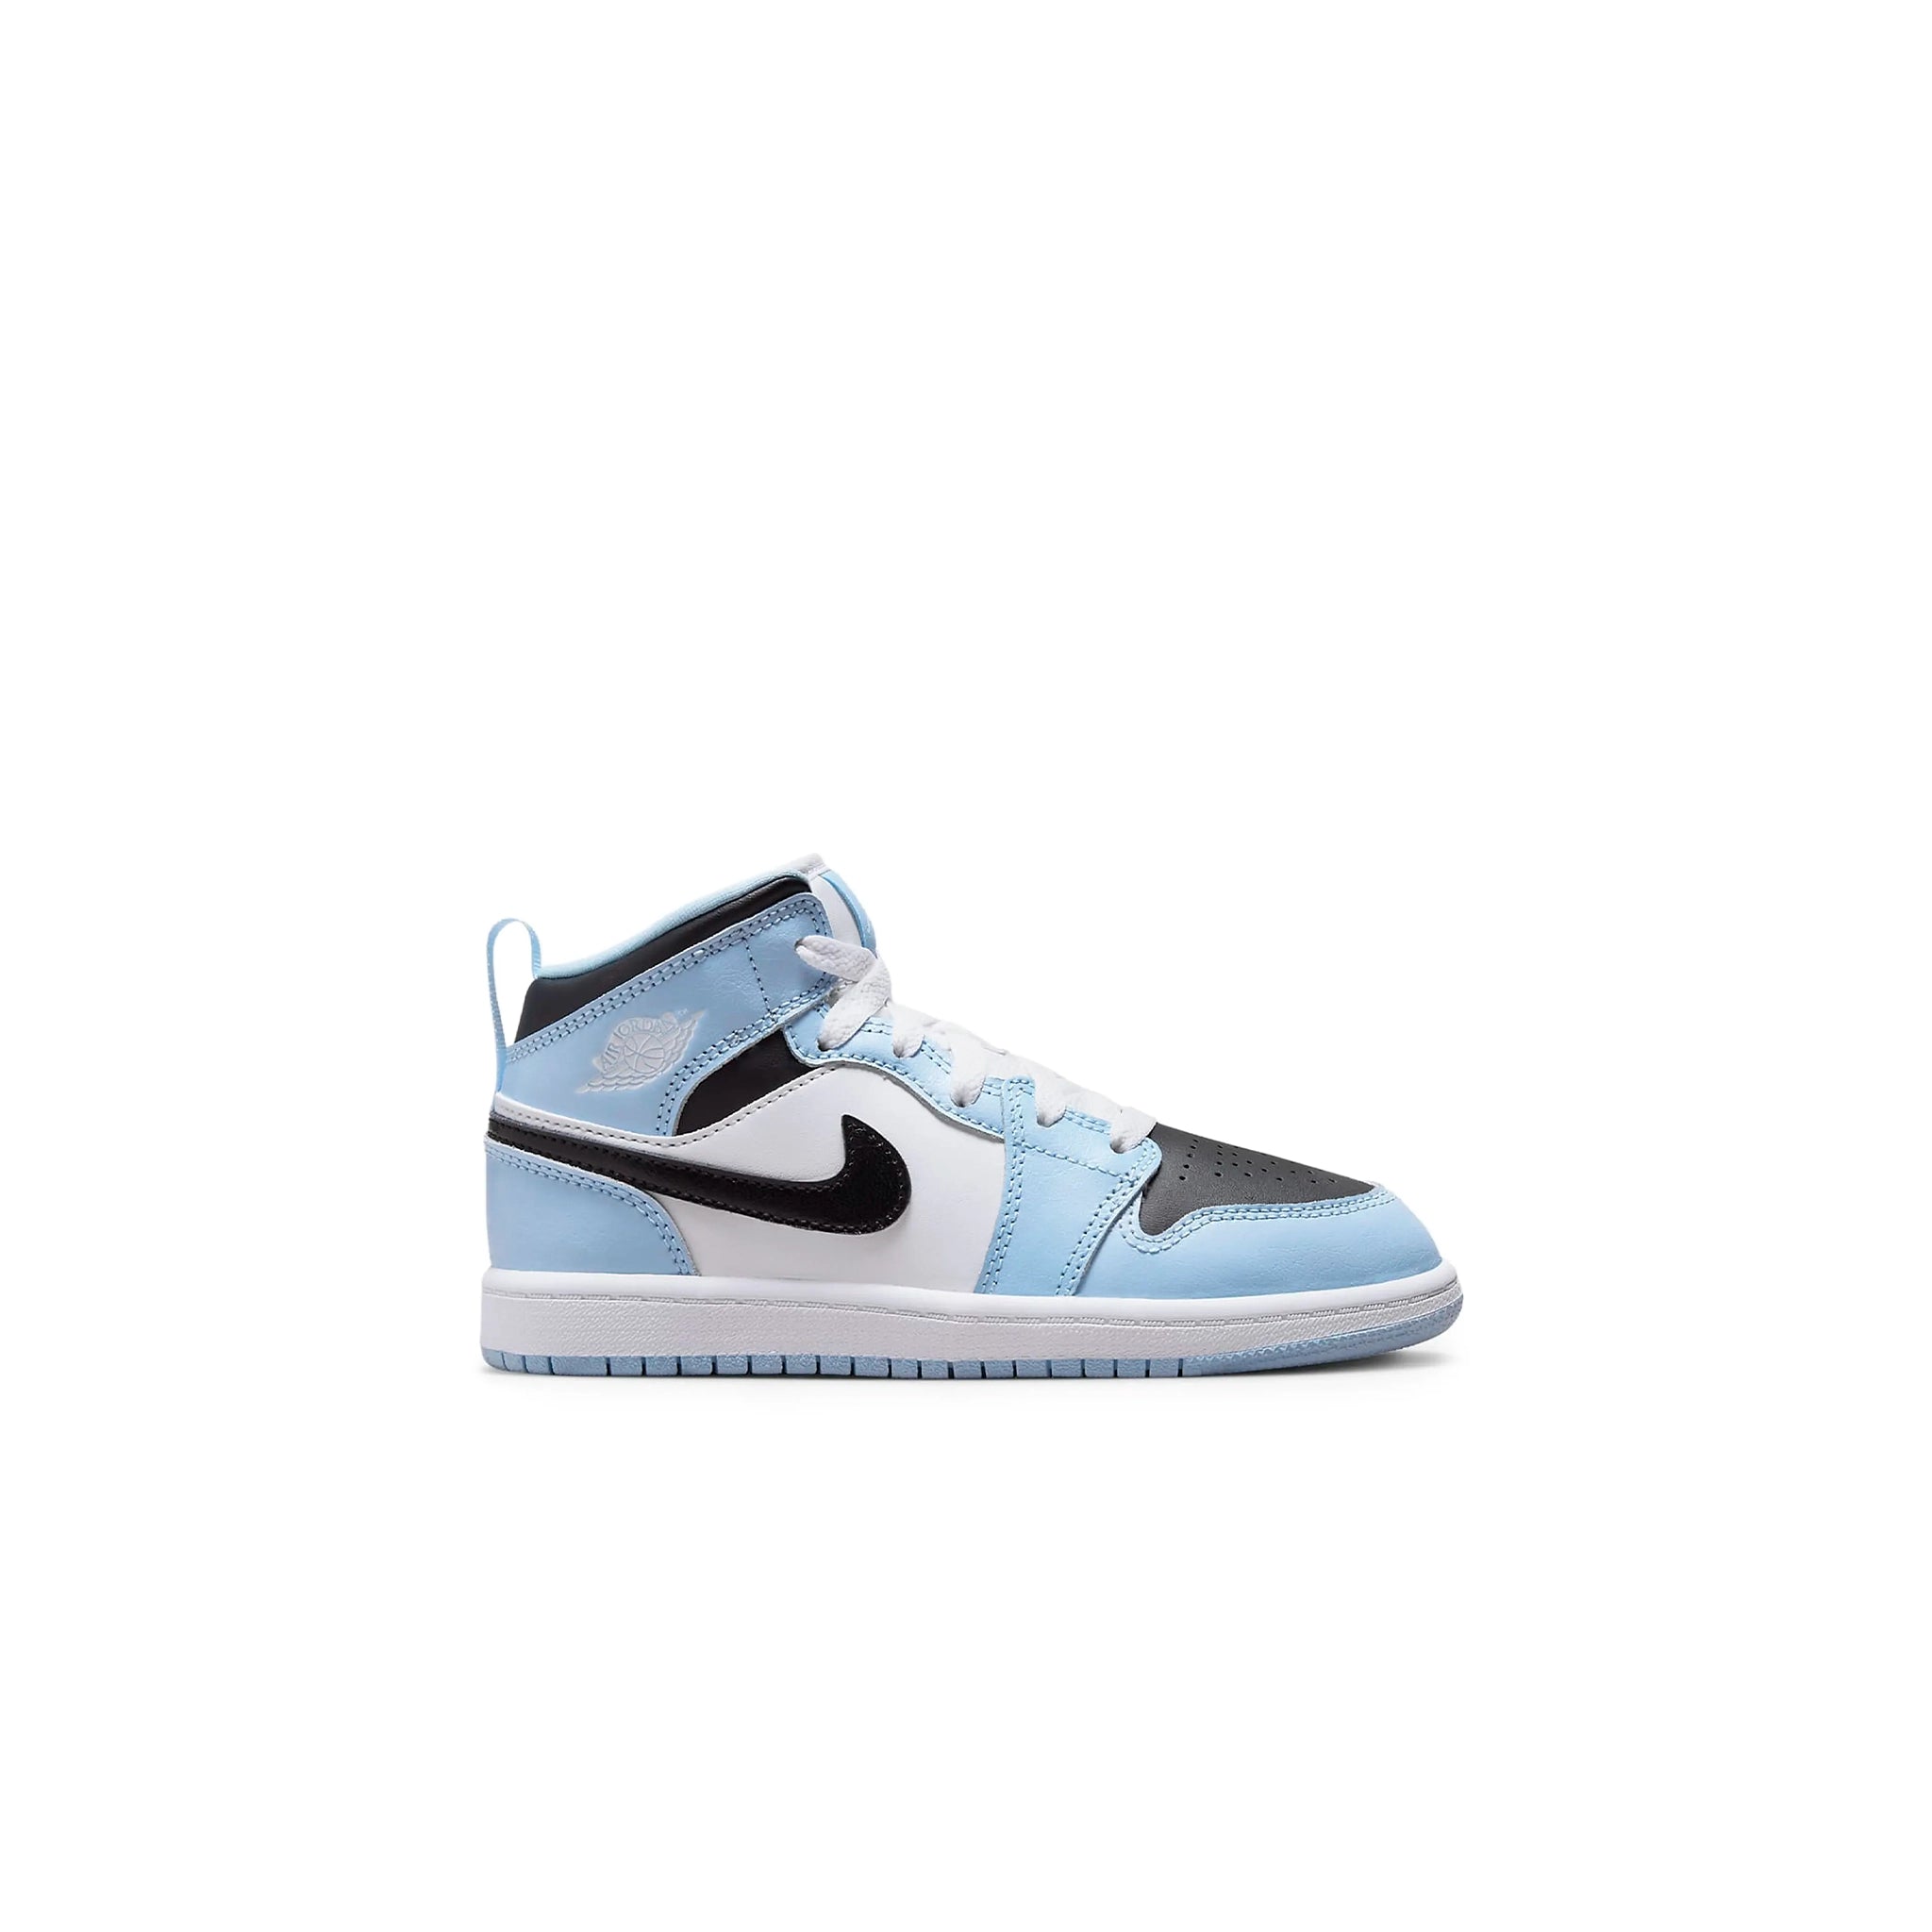 Side view of Air Wmns Air into jordan 1 Mid 'Wolf Grey Aluminum' BQ6472 105 Ice Blue (2022) (PS) 640737-401